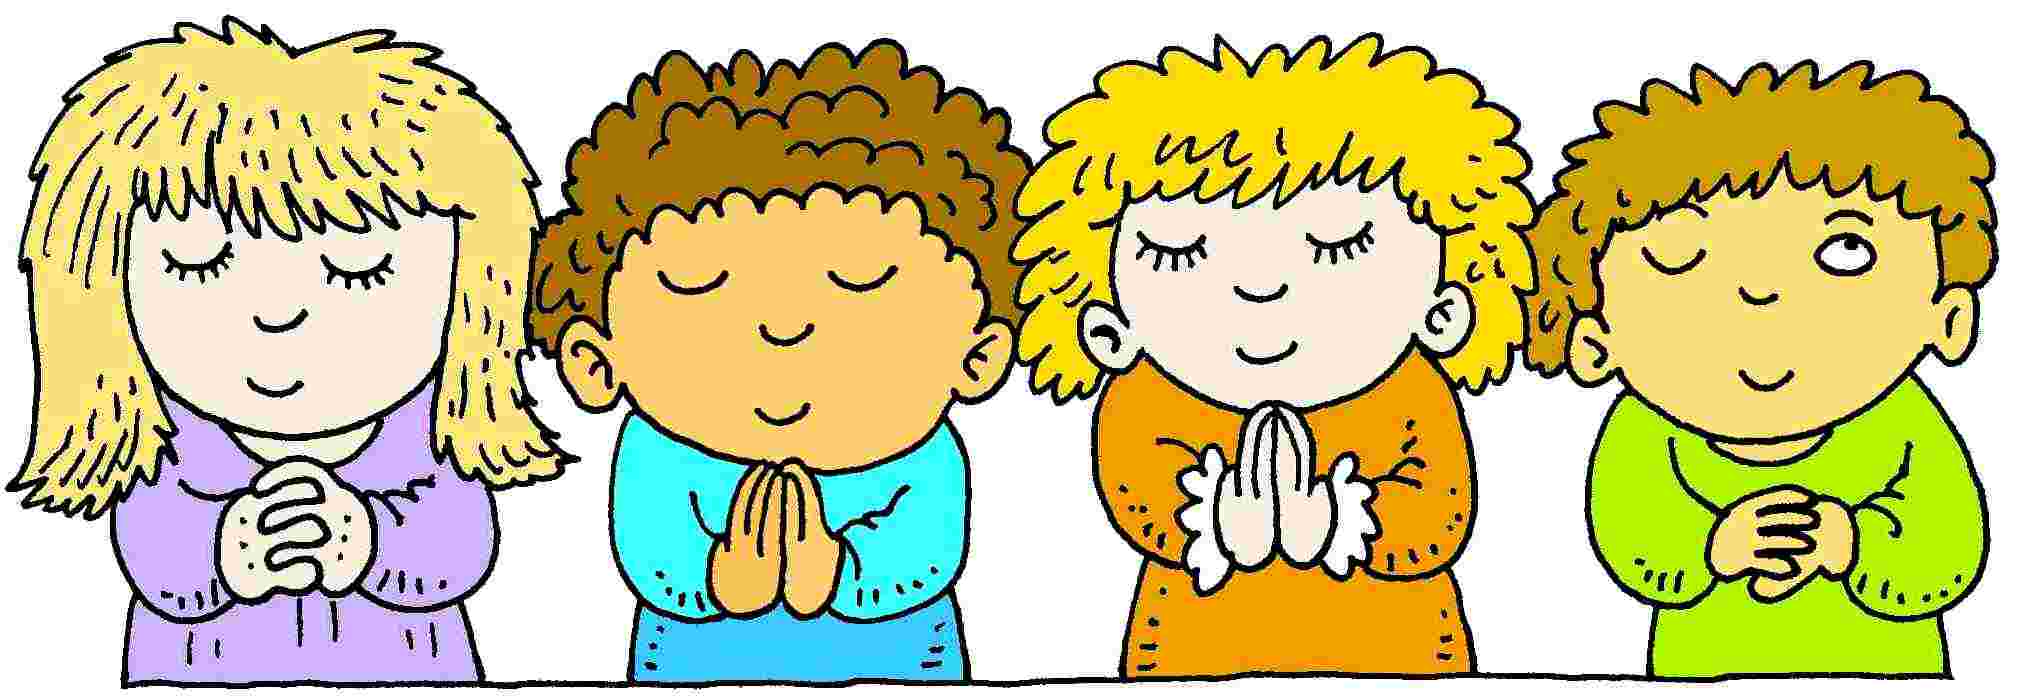 Prayer clipart free images 5